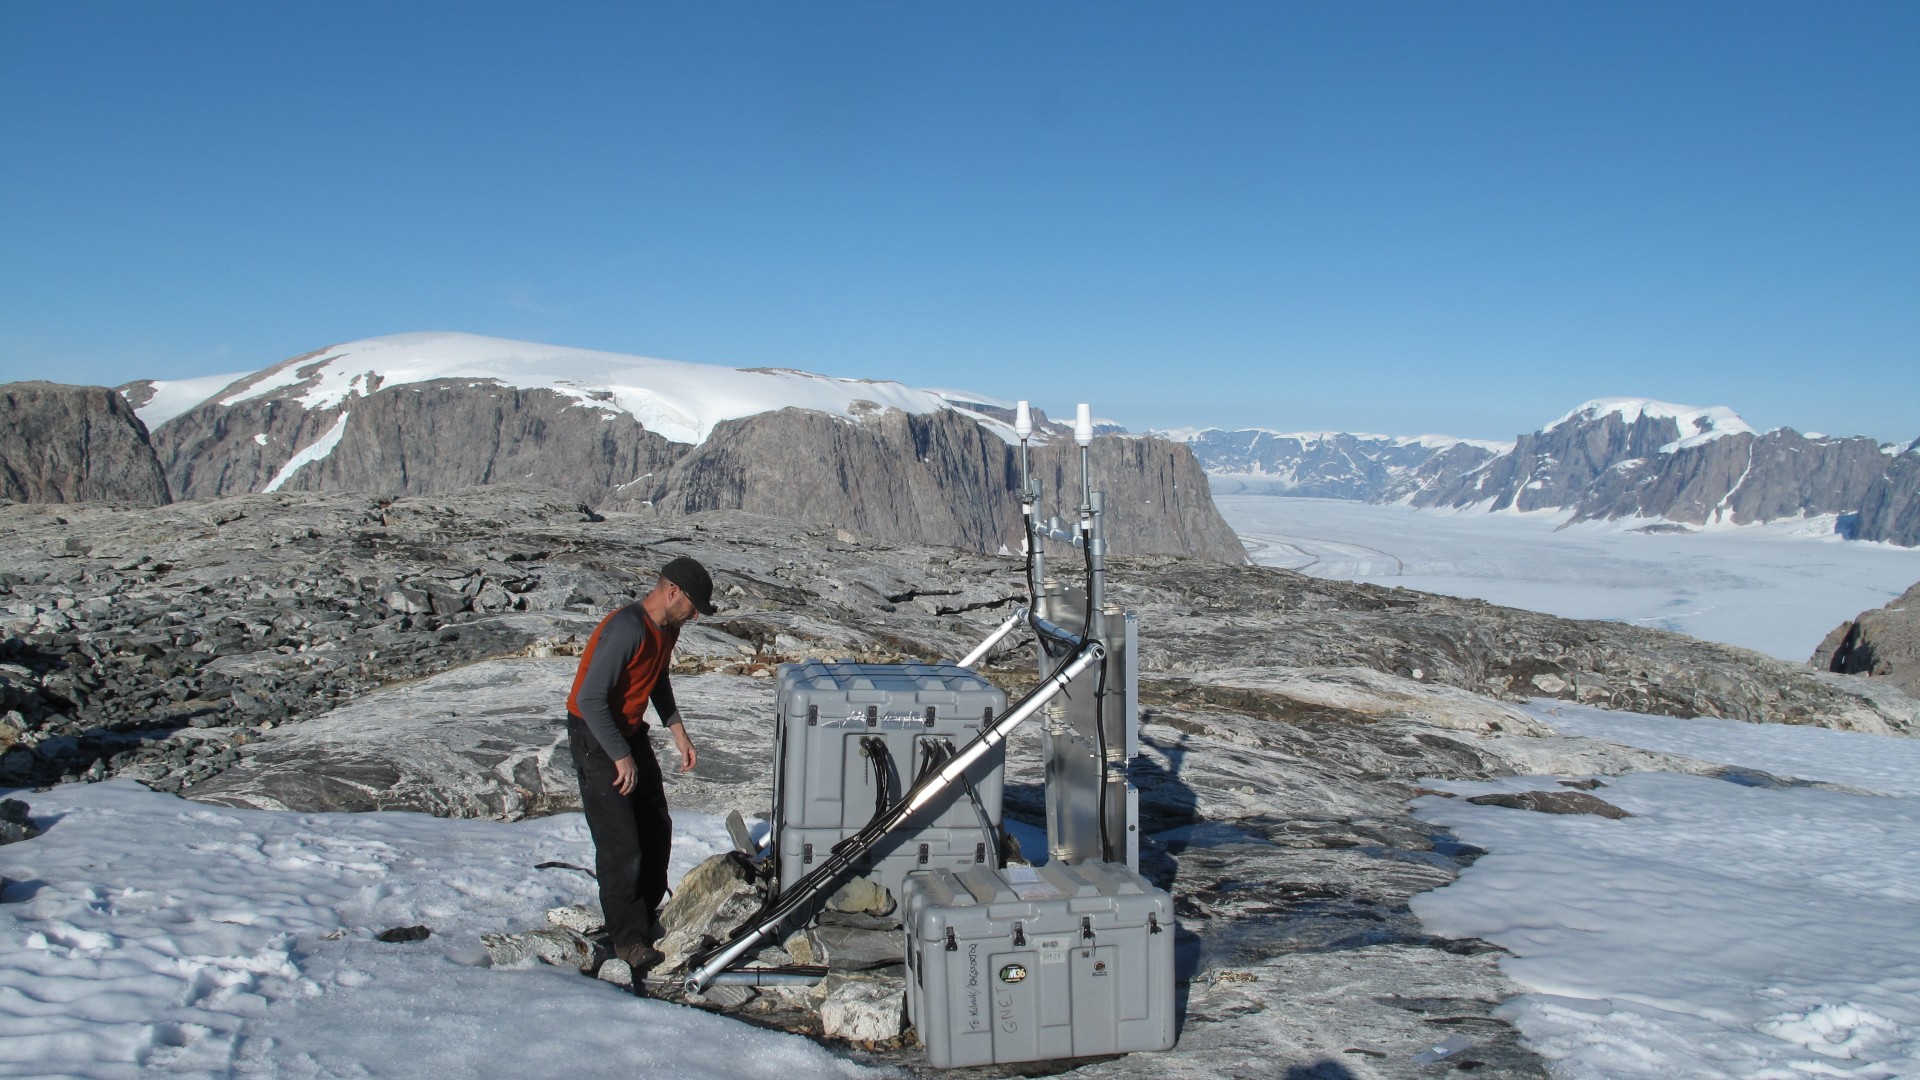 DTU-researches are using data 61 from national GPS stations in Greenland to monitor daily ice loss.